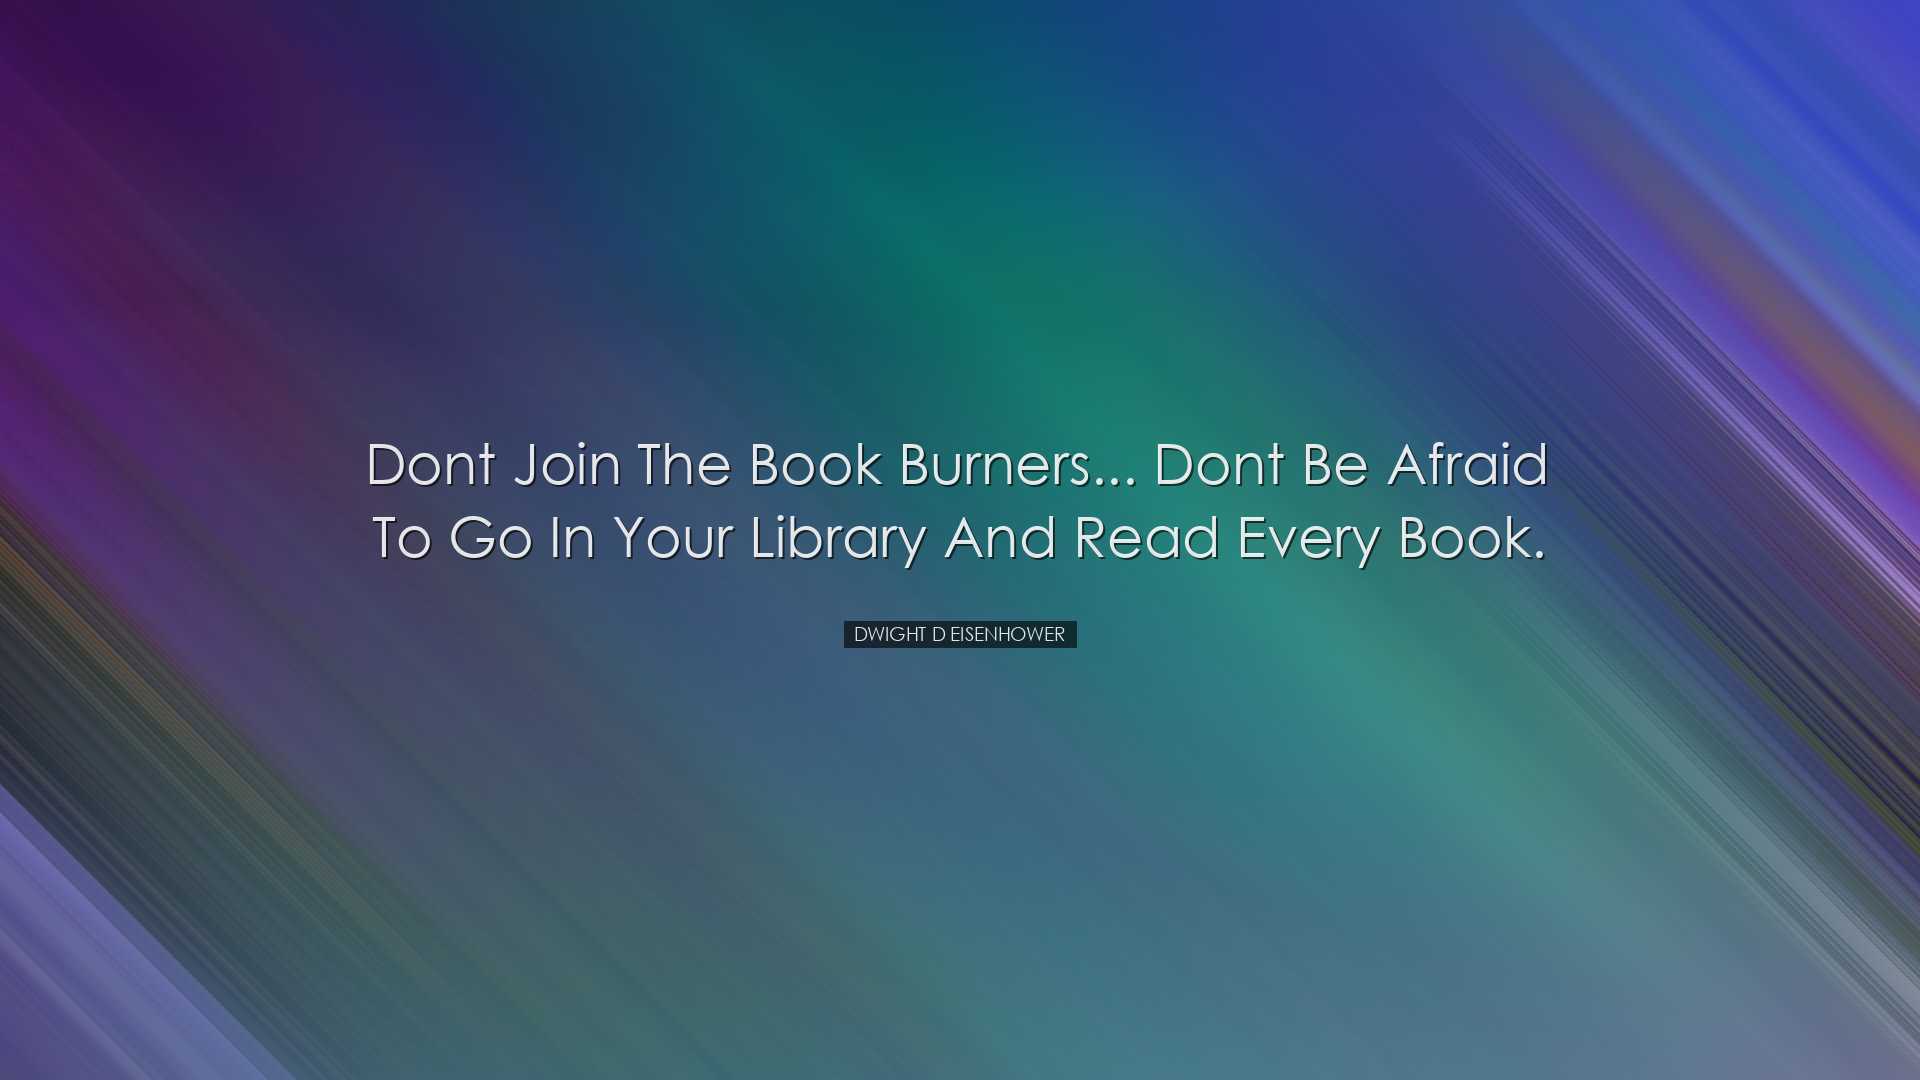 Dont join the book burners... Dont be afraid to go in your library